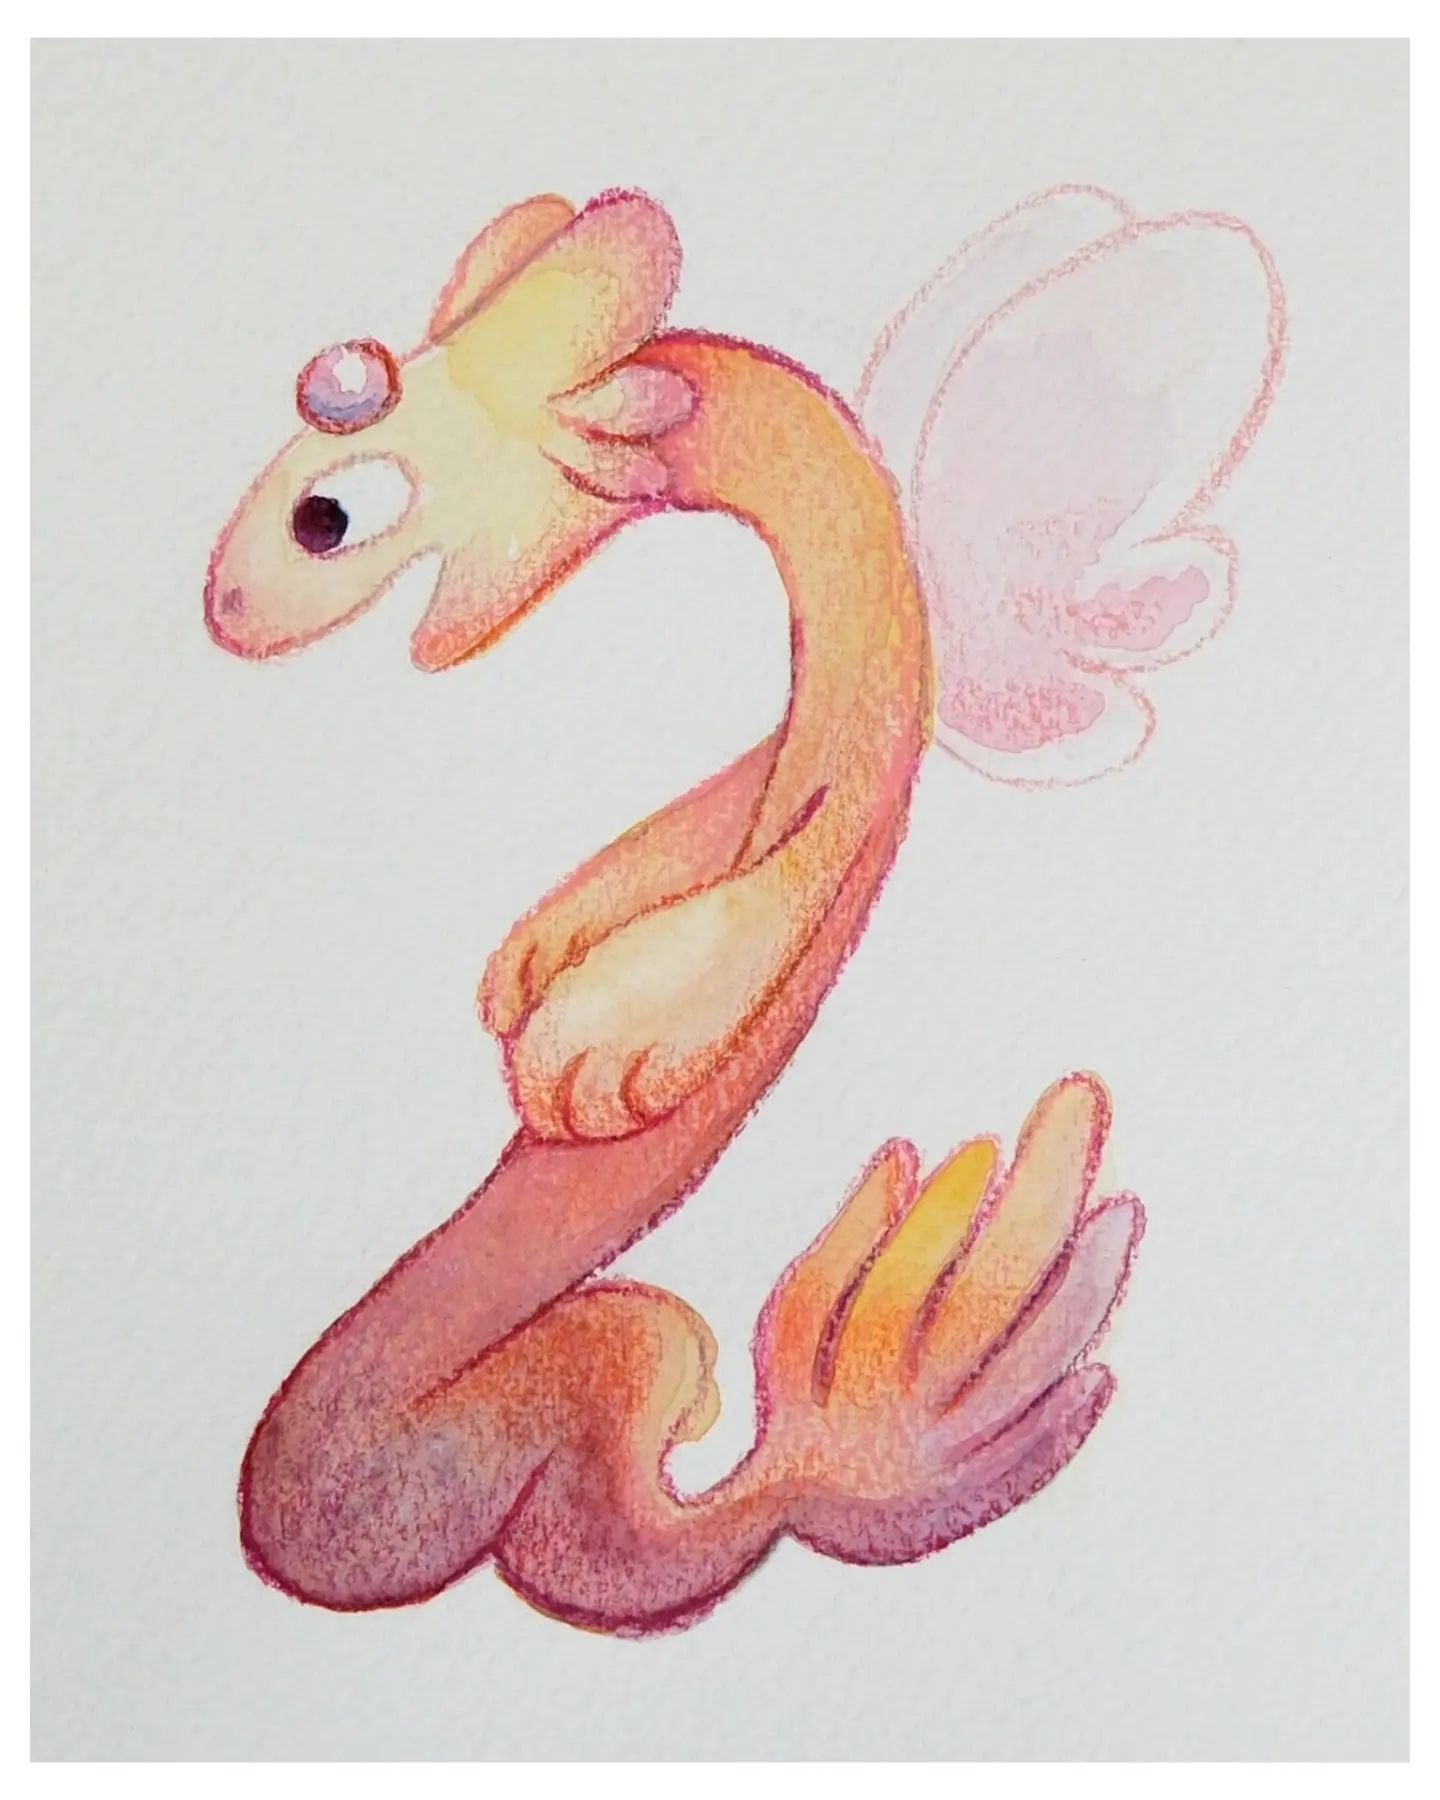 Painted this little friend in January, thought it would be fitting for Valentine's Day 🌞💘

I've been sketching a bunch of these creatures for future ceramic projects. Excited to bring them to life in 3D form! I have other plans for them as well, in